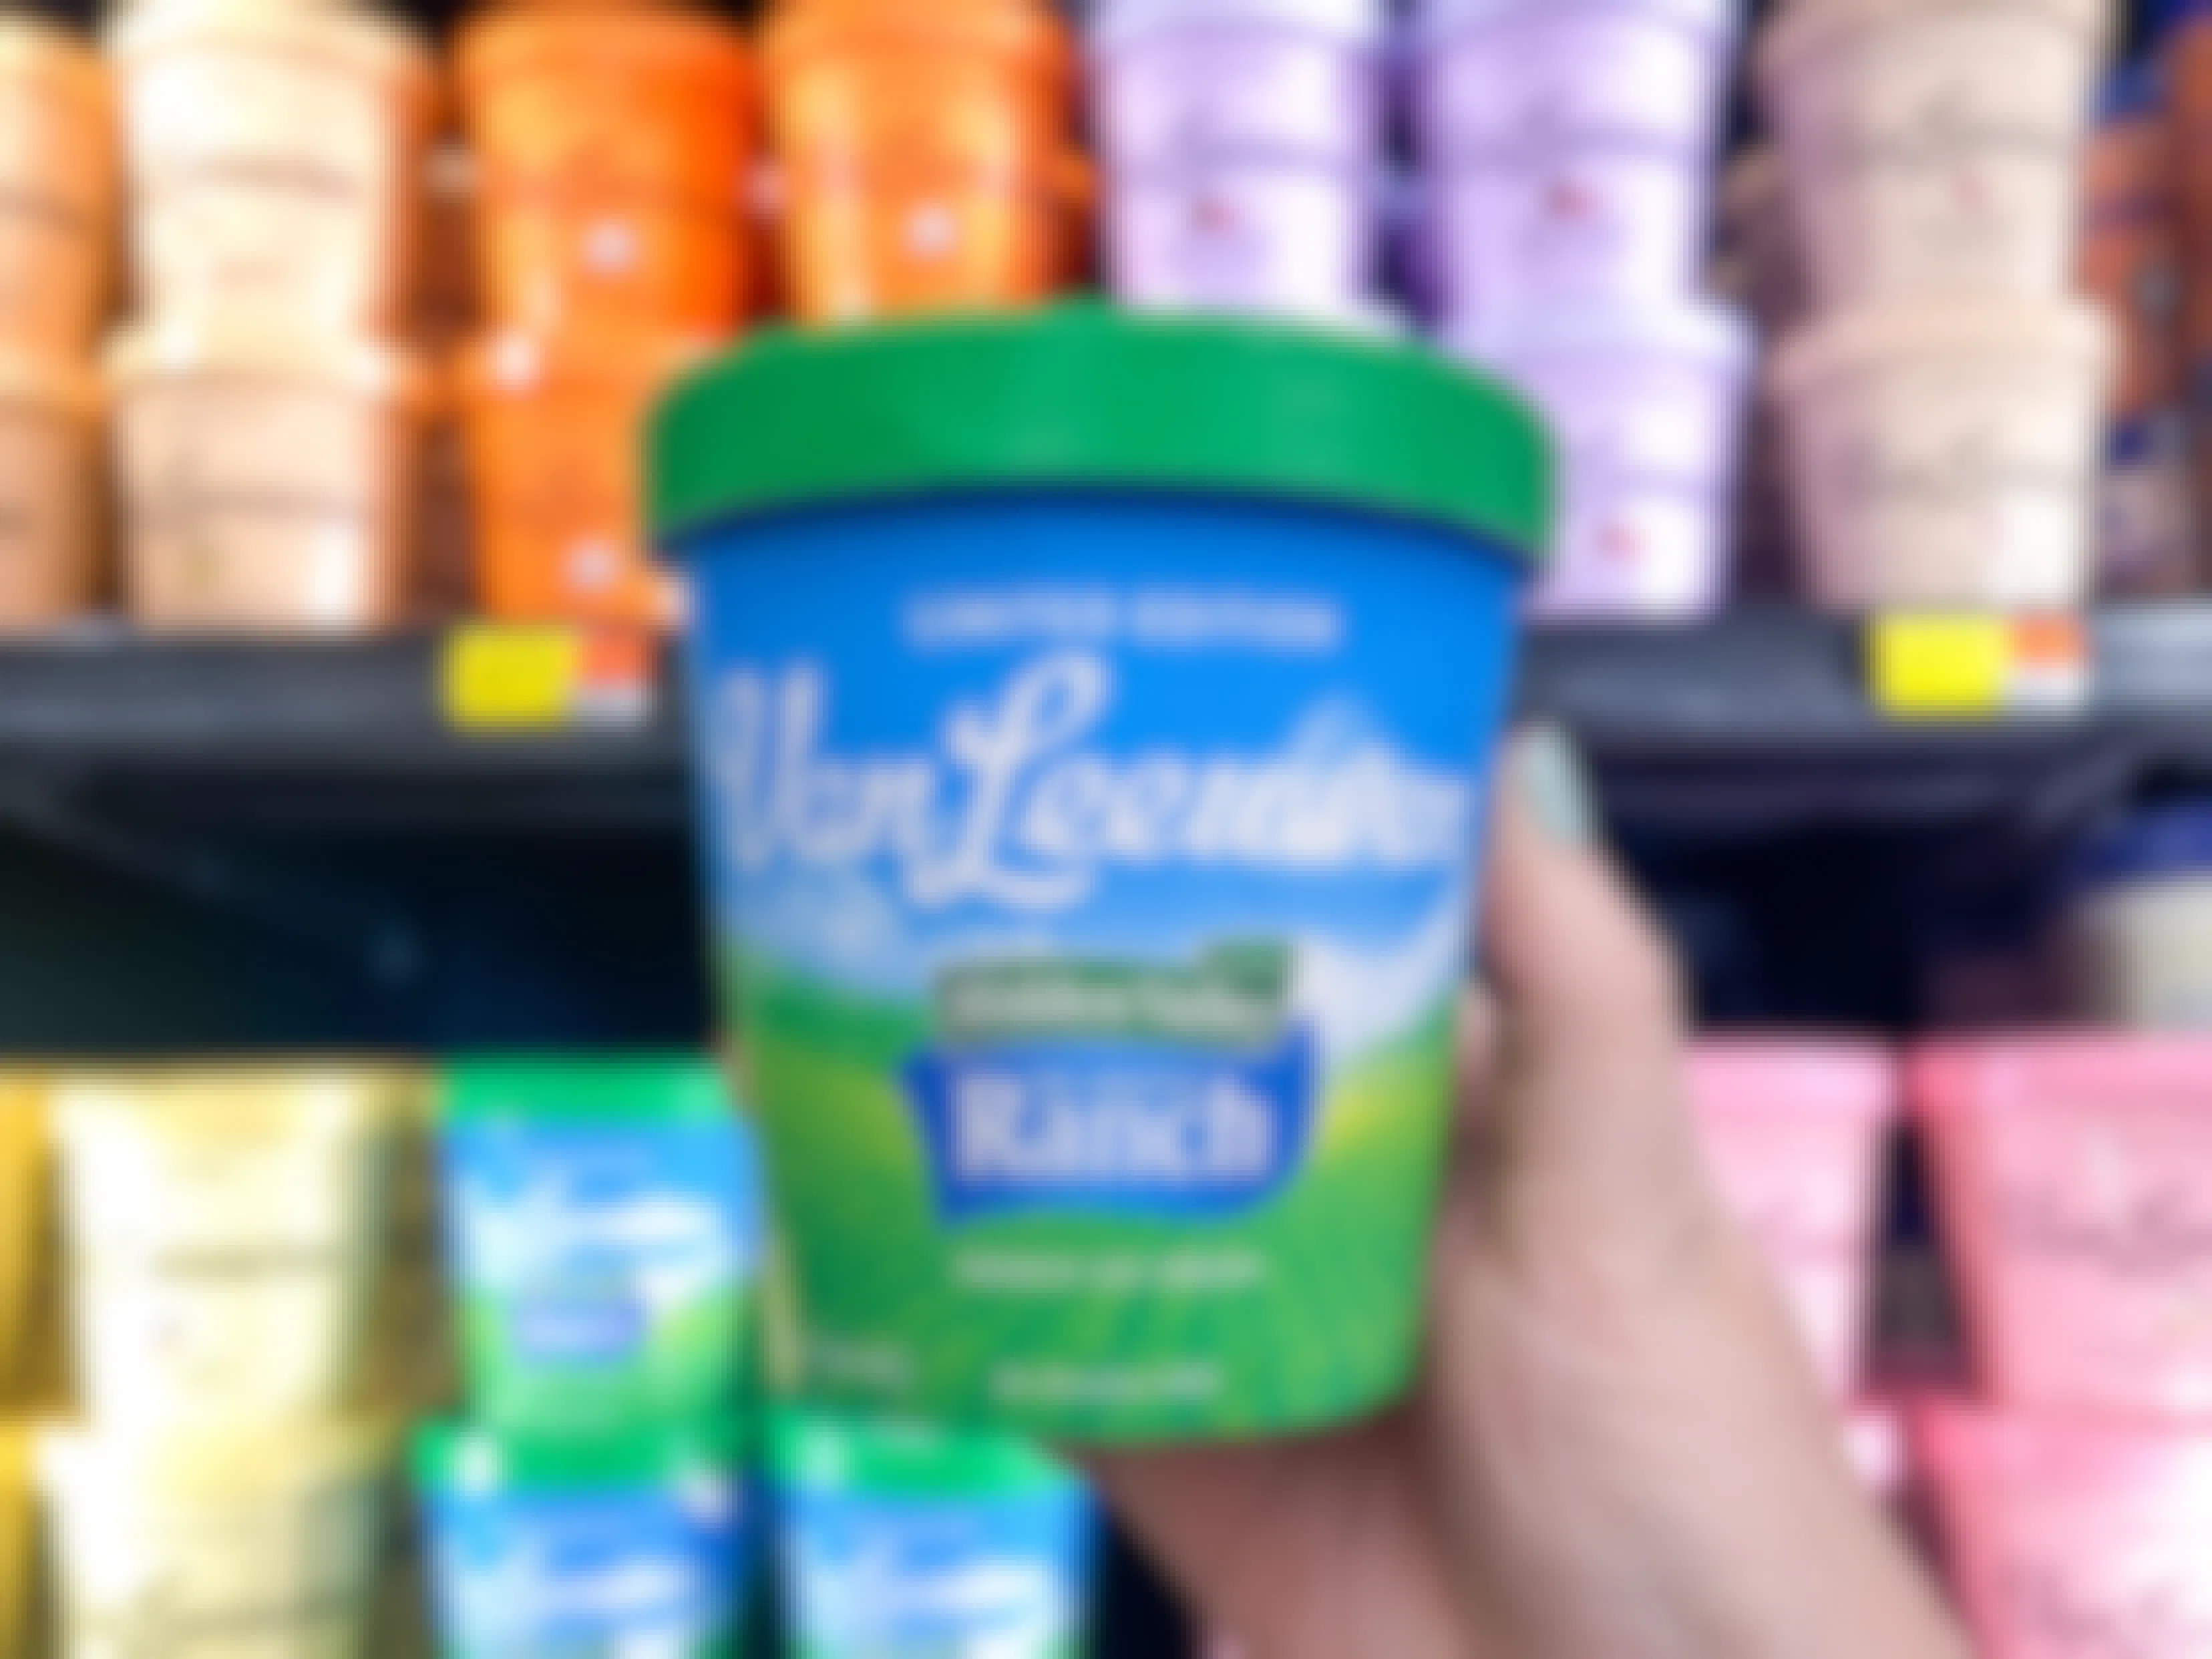 A Ranch Ice Cream Flavor Is Now at Walmart — Here's the Full Scoop